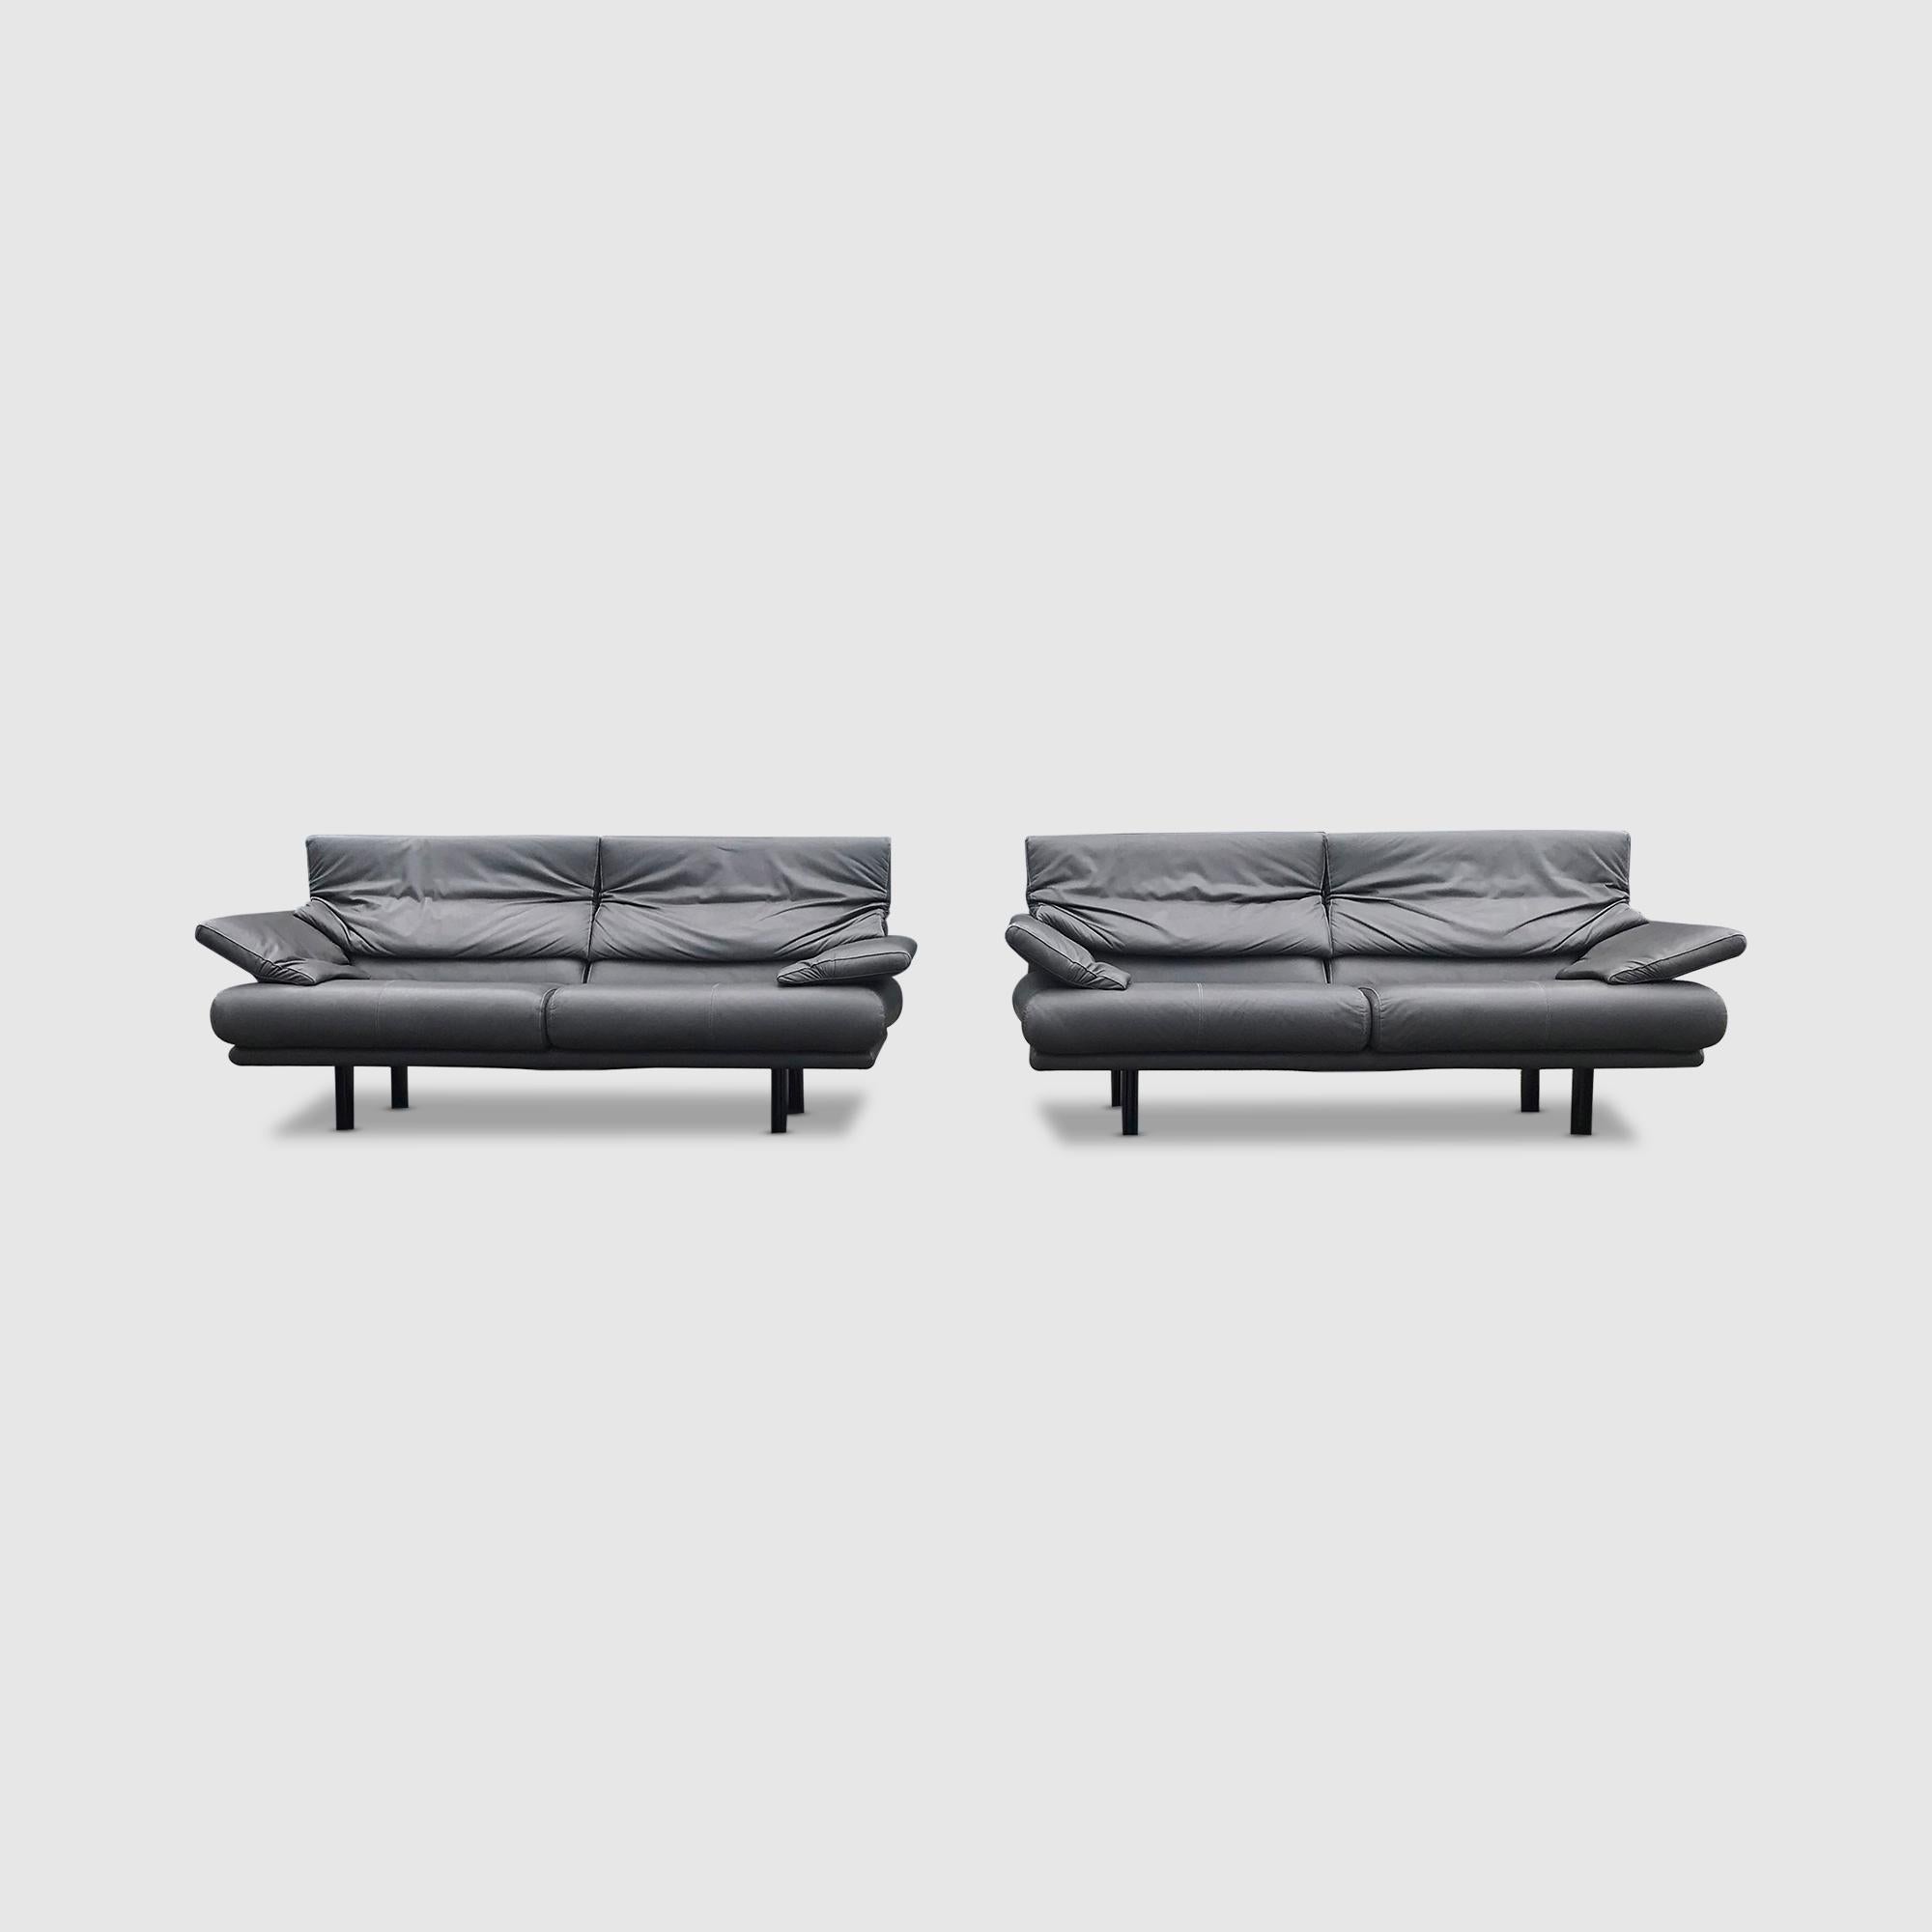 Postmodern design by Paolo Piva; an Alanda sofa in dark grey petrol leather.

Modern design by Paolo Piva, a voluminous sofa in thick aniline leather and royally padded cushions offset in appearance with relatively slender black metal feet. It